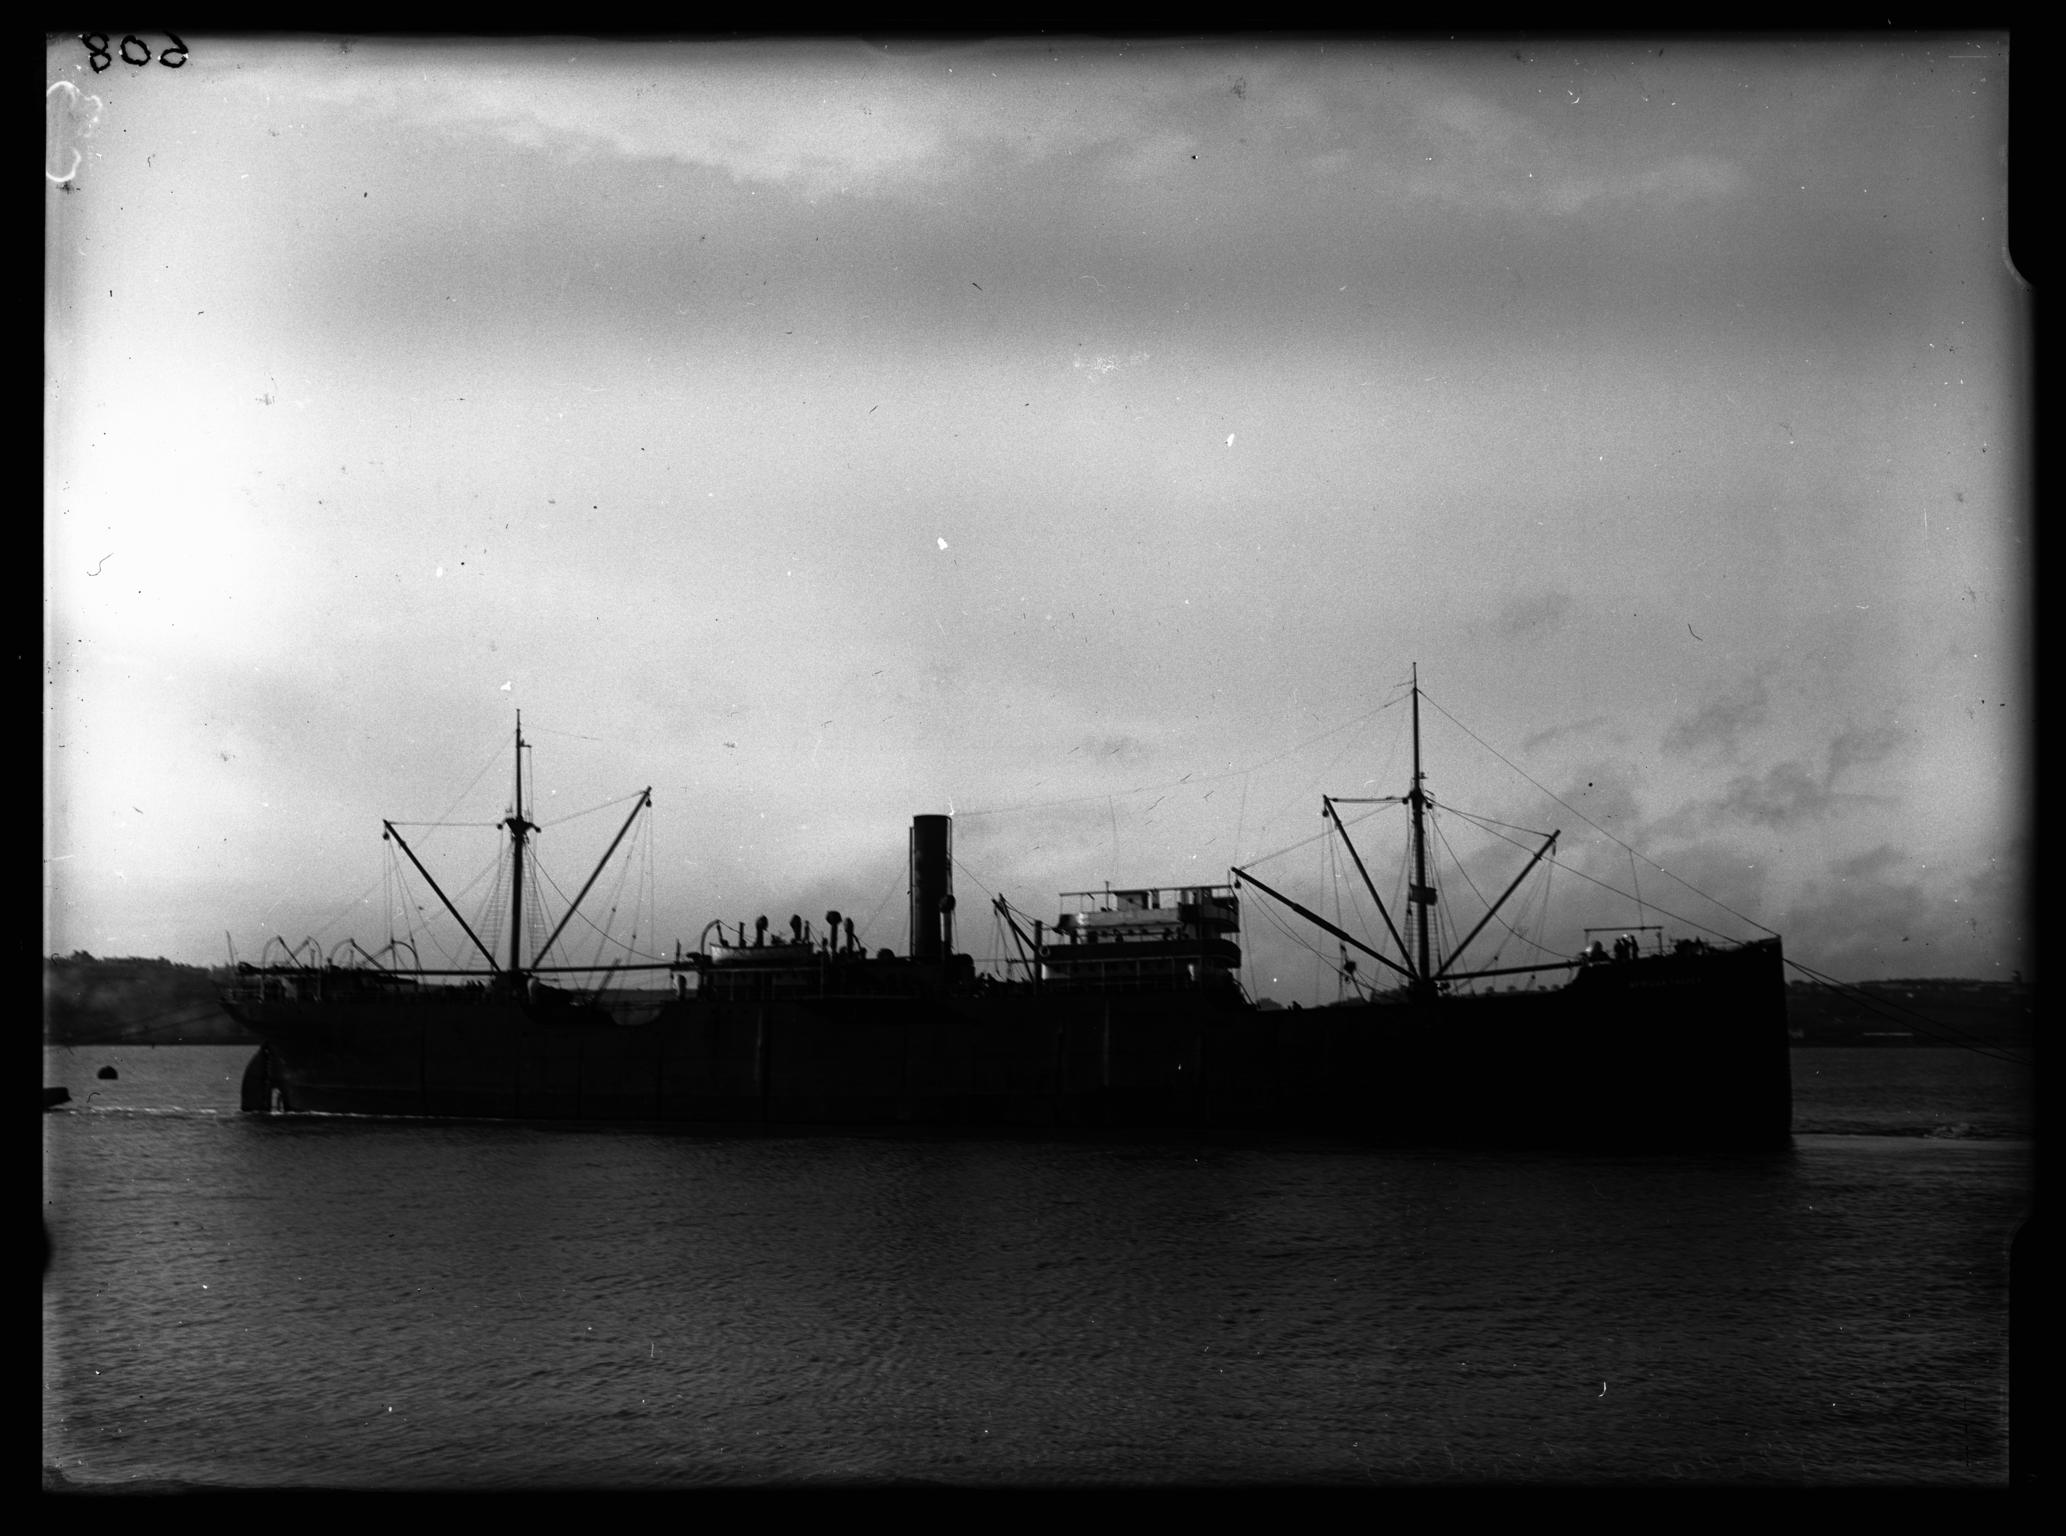 S.S. AFRICAN TRADER, glass negative